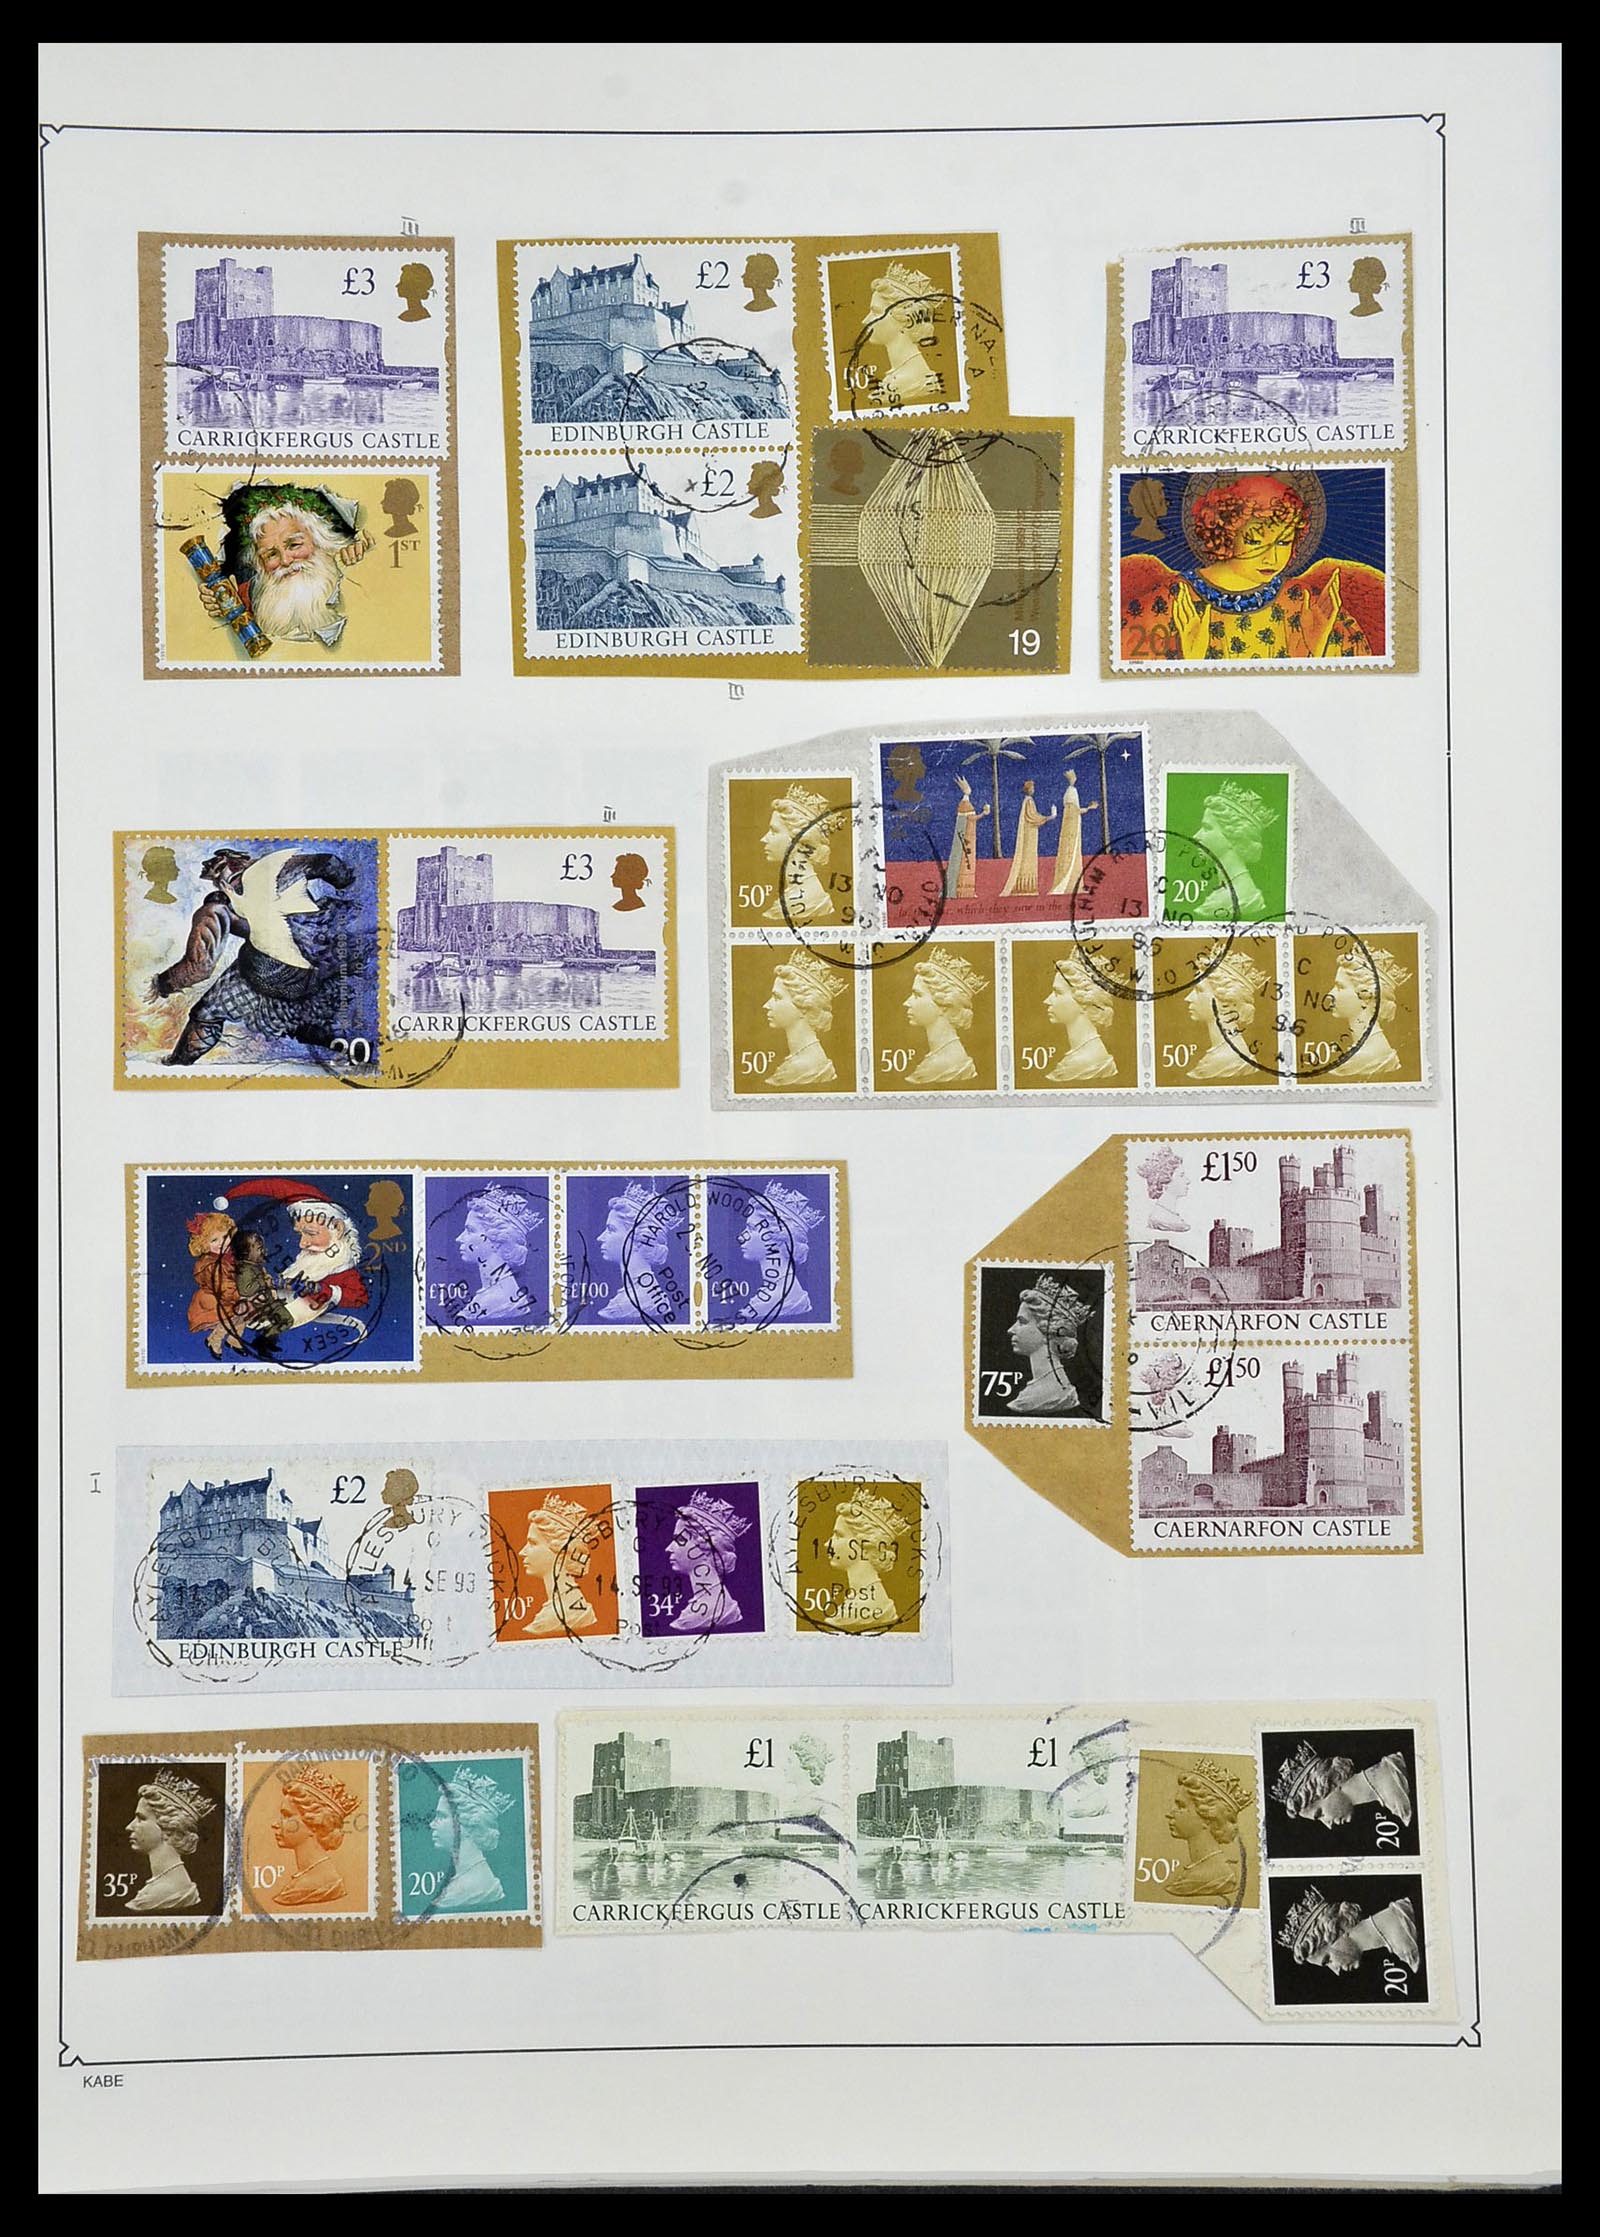 34221 176 - Stamp collection 34221 Great Britain Machins/castles 1971-2005.